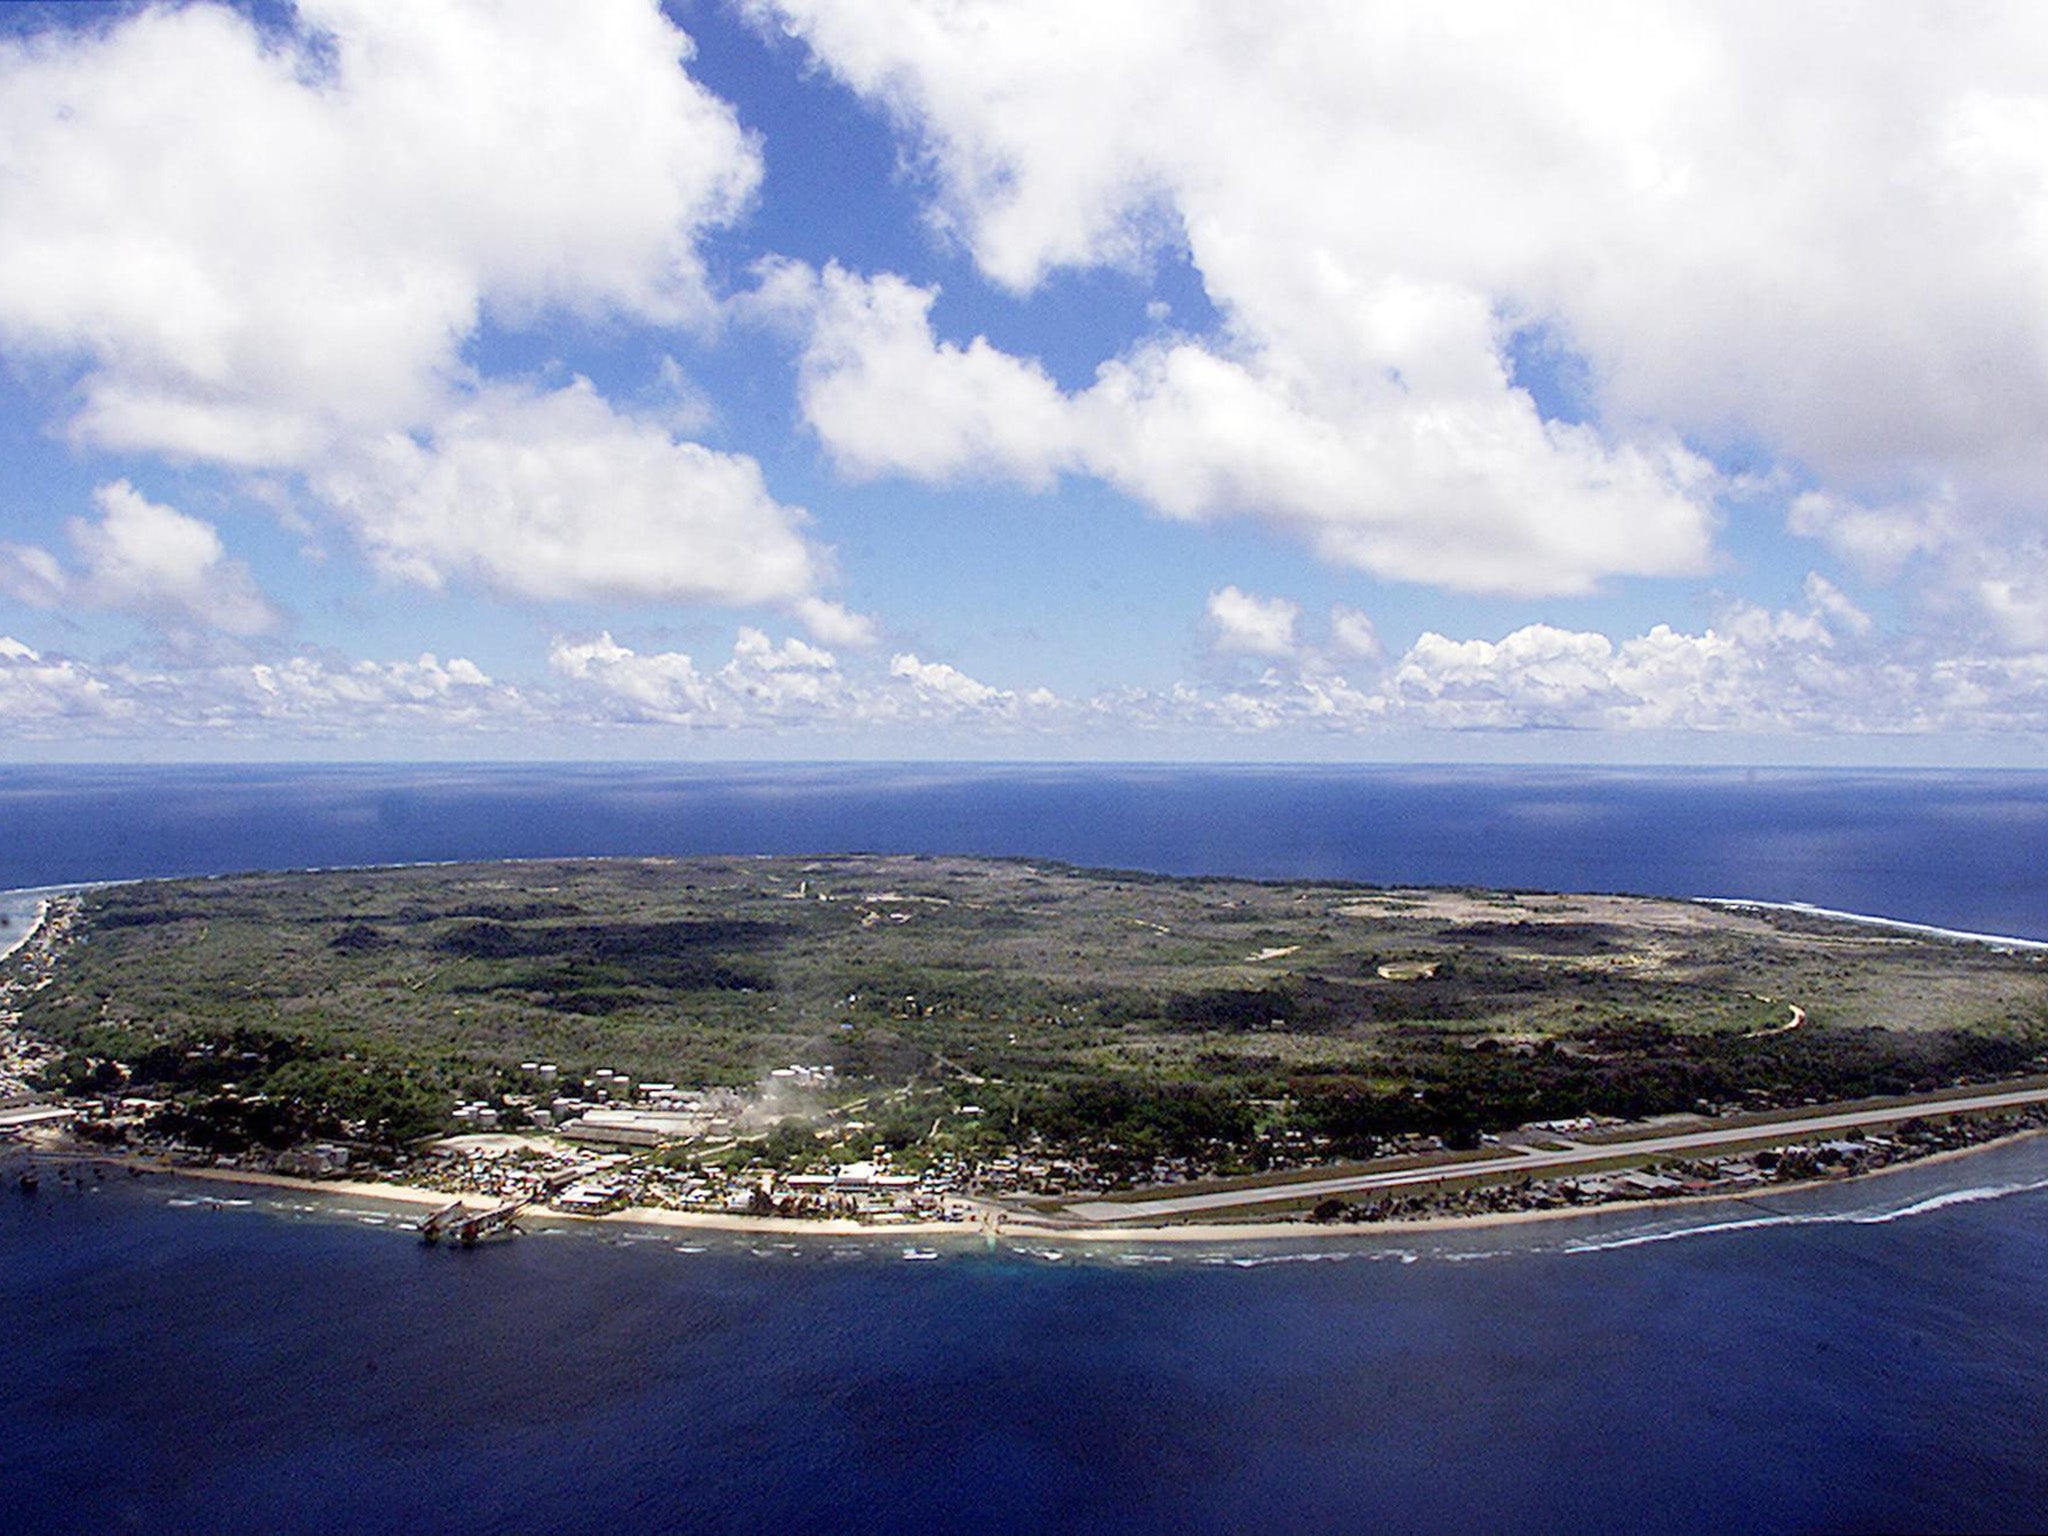 The island of Nauru in the South Pacific.